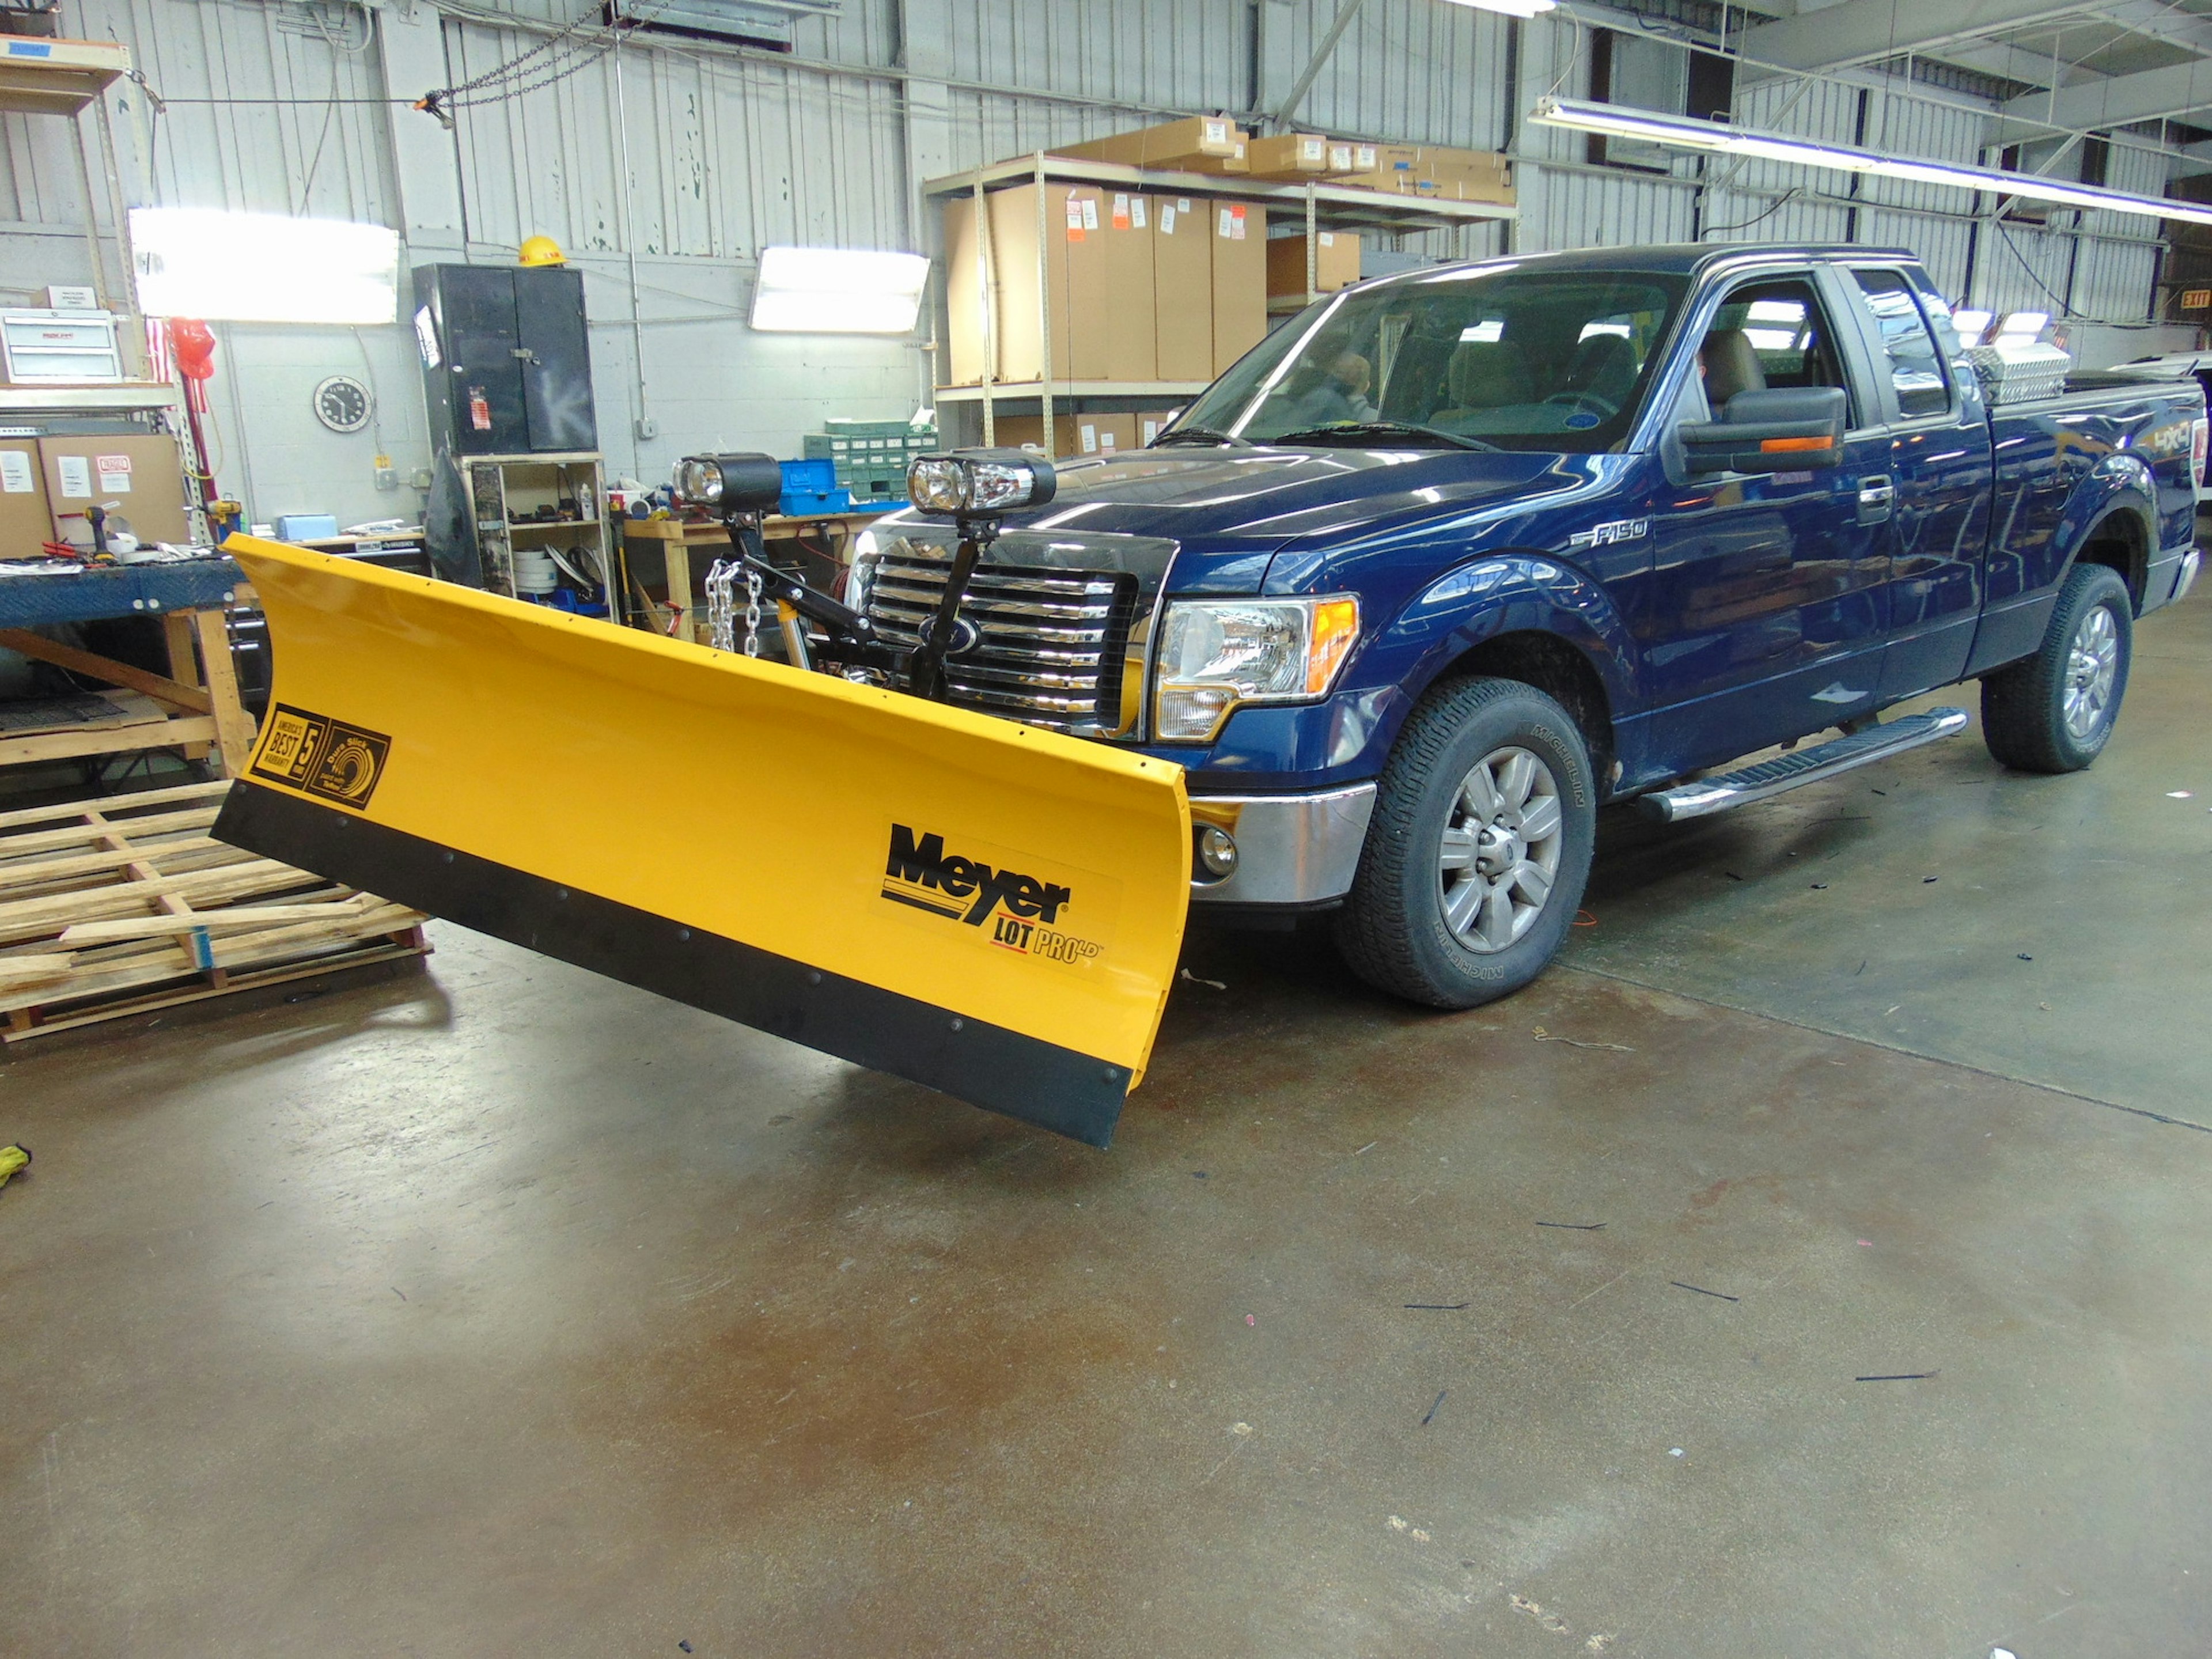 Pickup Truck carrying Snow Plow Attachment Ready for Winter